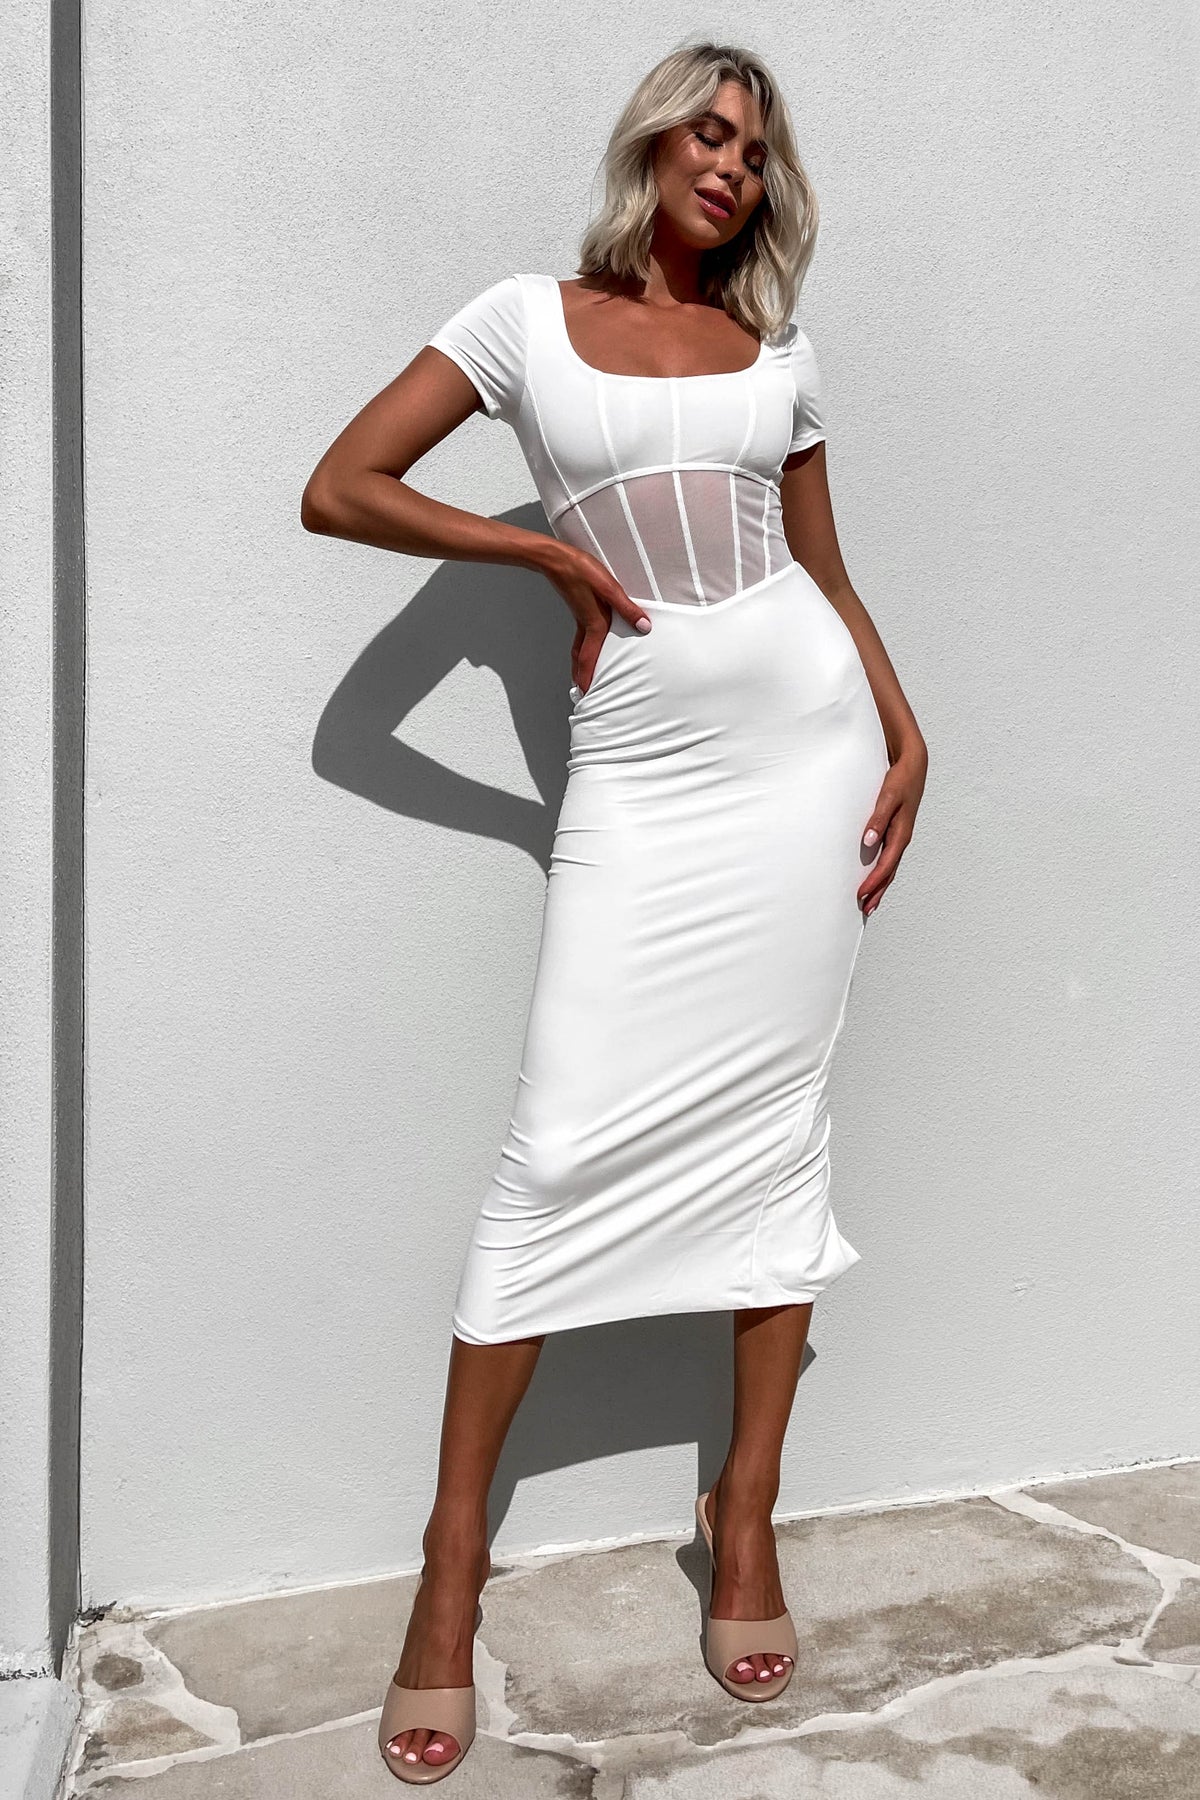 Tamias Dress, COTTON &amp; POLYESTER, COTTON AND POLYESTER, DRESS, DRESSES, MIDI DRESS, new arrivals, POLYESTER AND COTTON, WHITE, , -MISHKAH